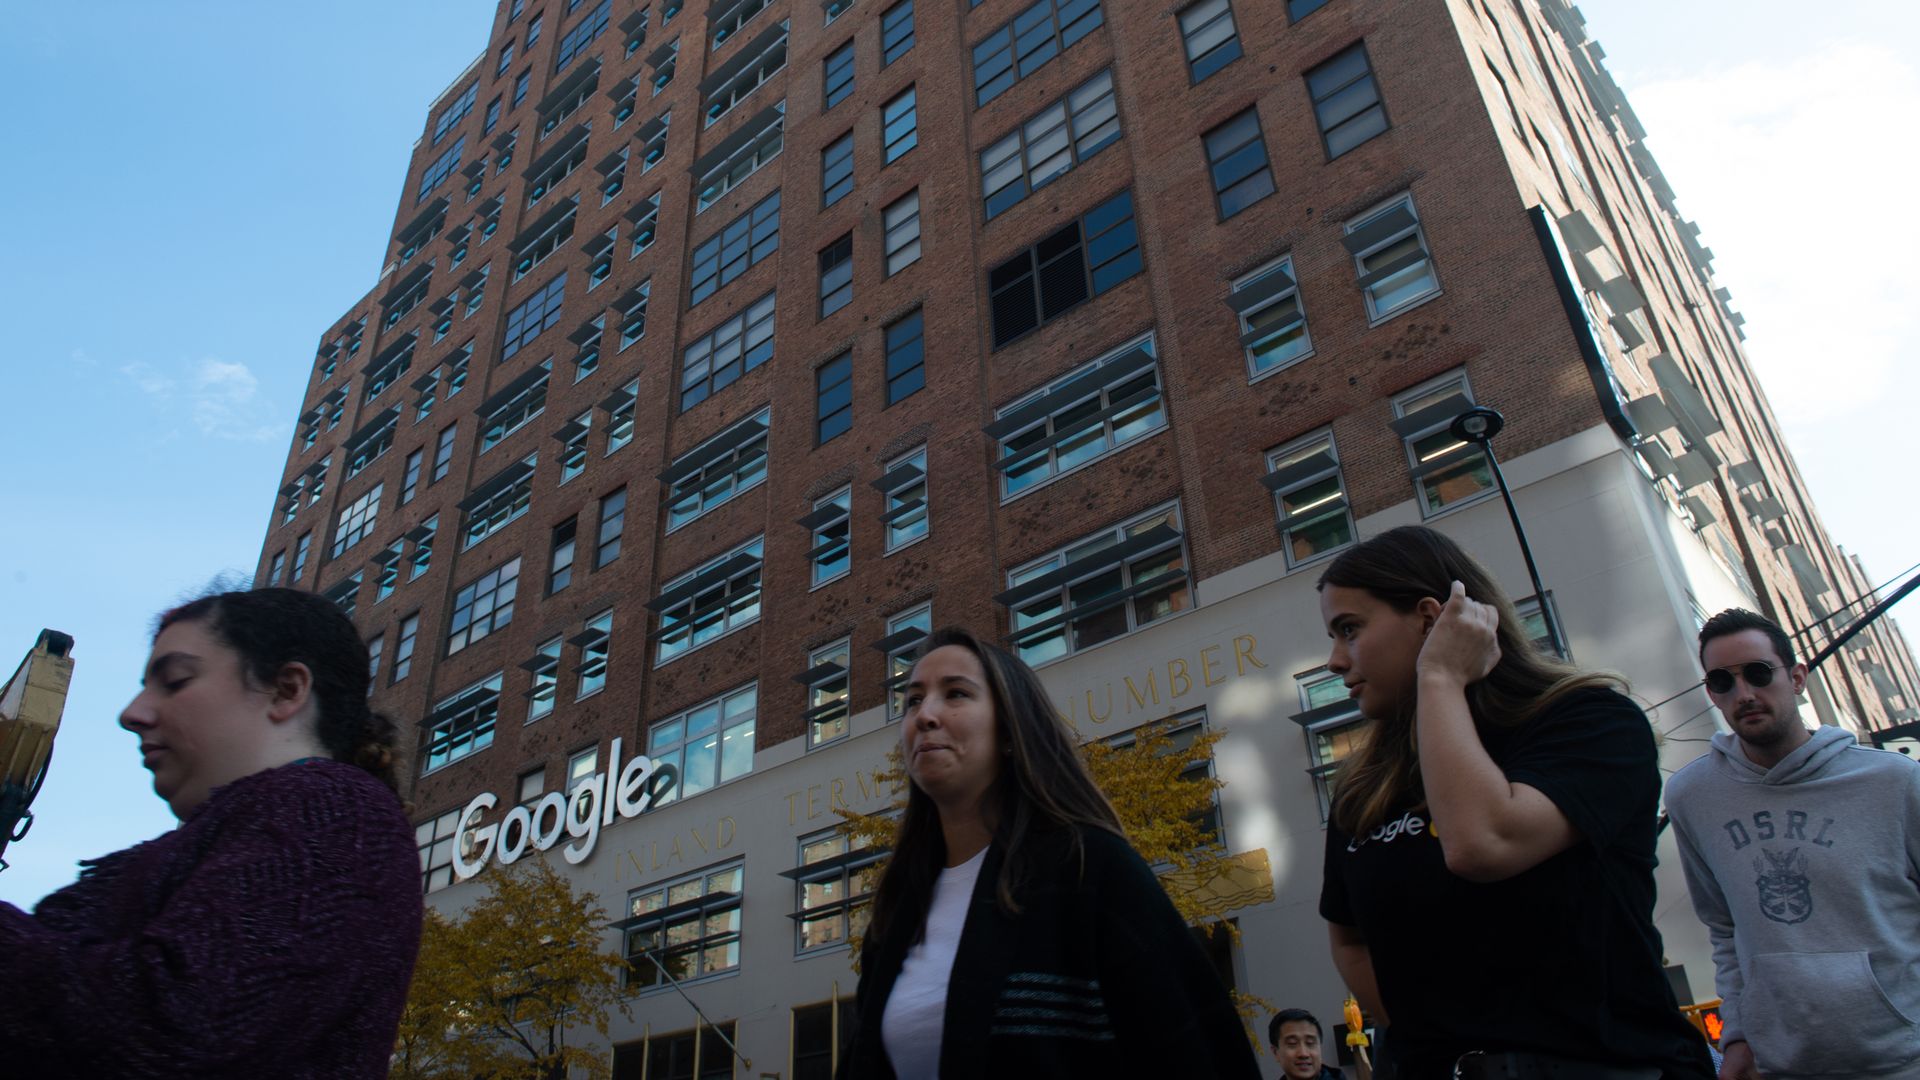 A group of people walk in front of a building with a white "Google" sign